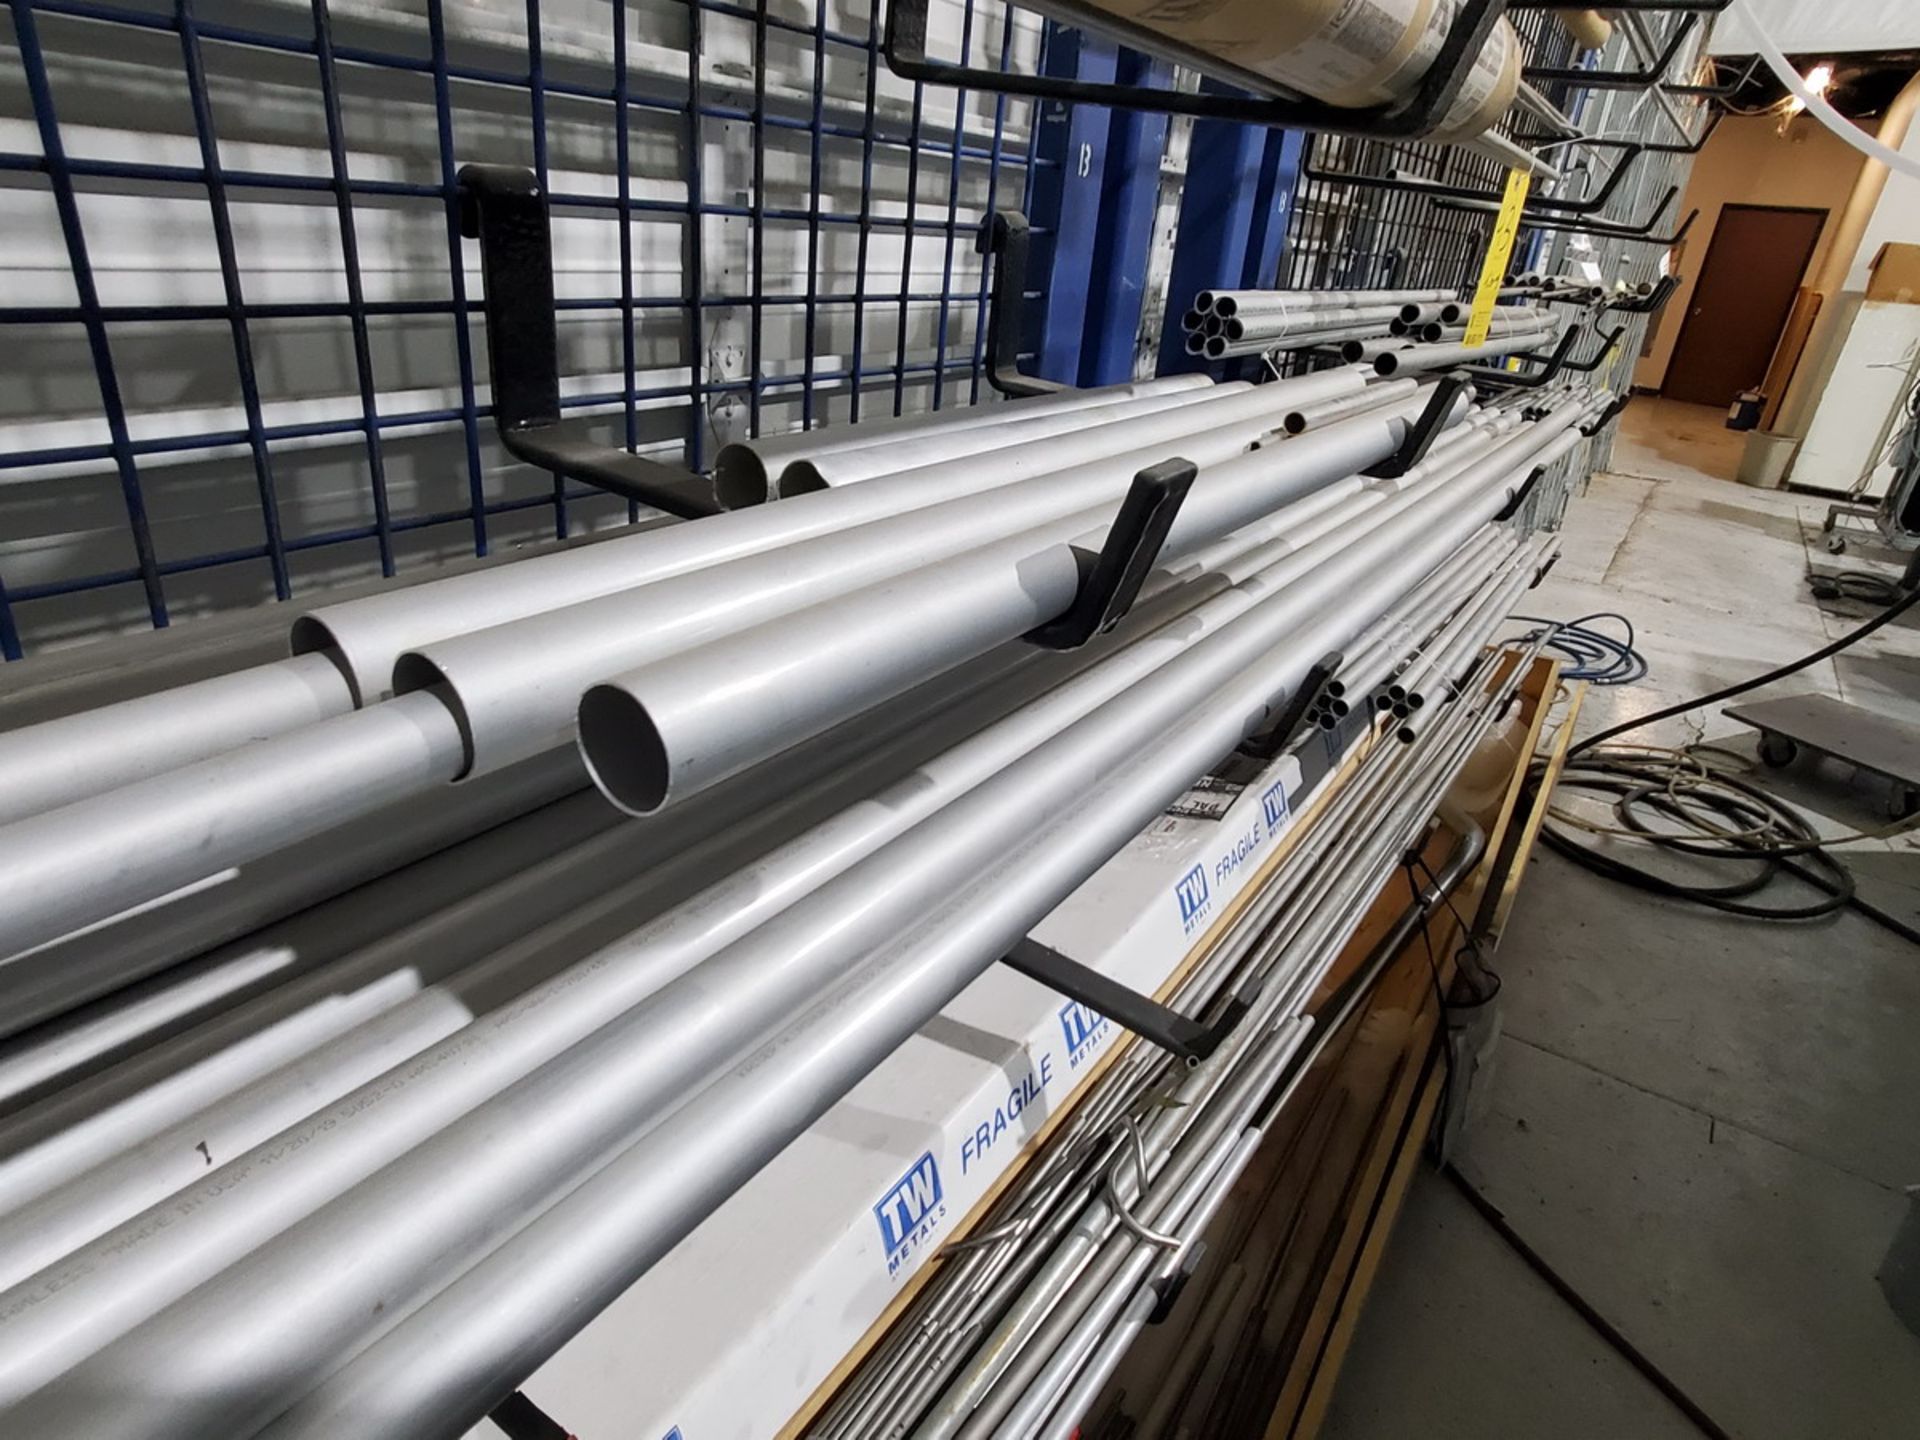 Assorted Aluminum Tubing O.D. Size Range: 1/4"-1-1/2", Length: 18"-12' (Racks Excluded) - Image 9 of 25